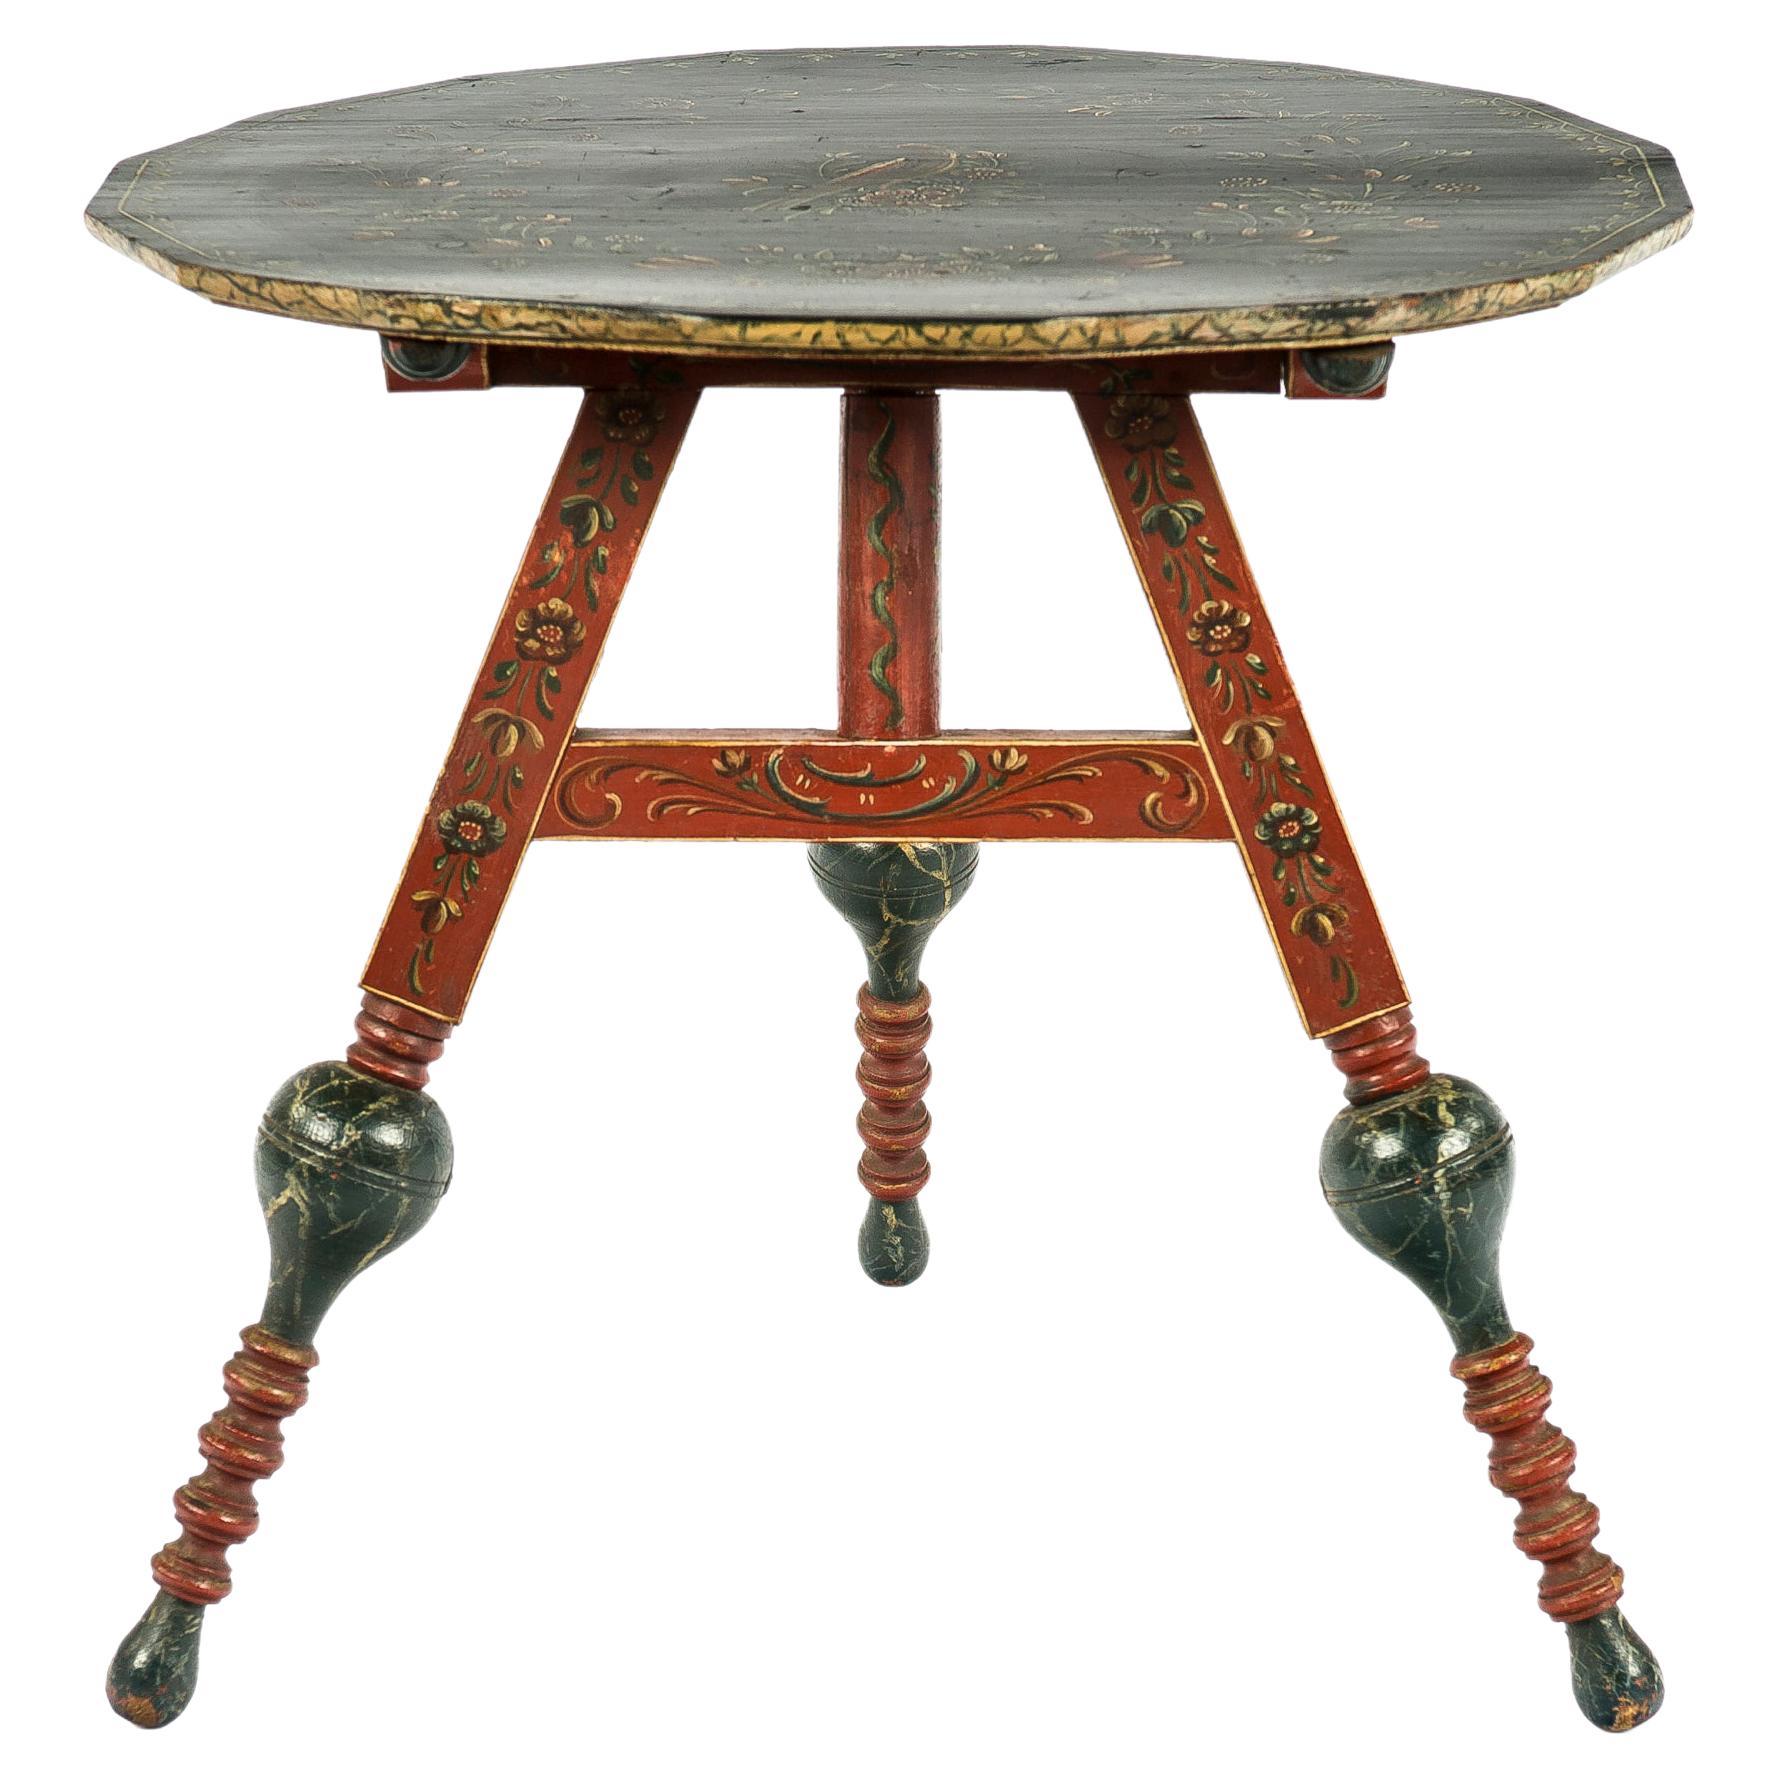 Antique Early 19th Century Dutch Folk Art “Hindeloopen” Painted Tilt Top Table For Sale